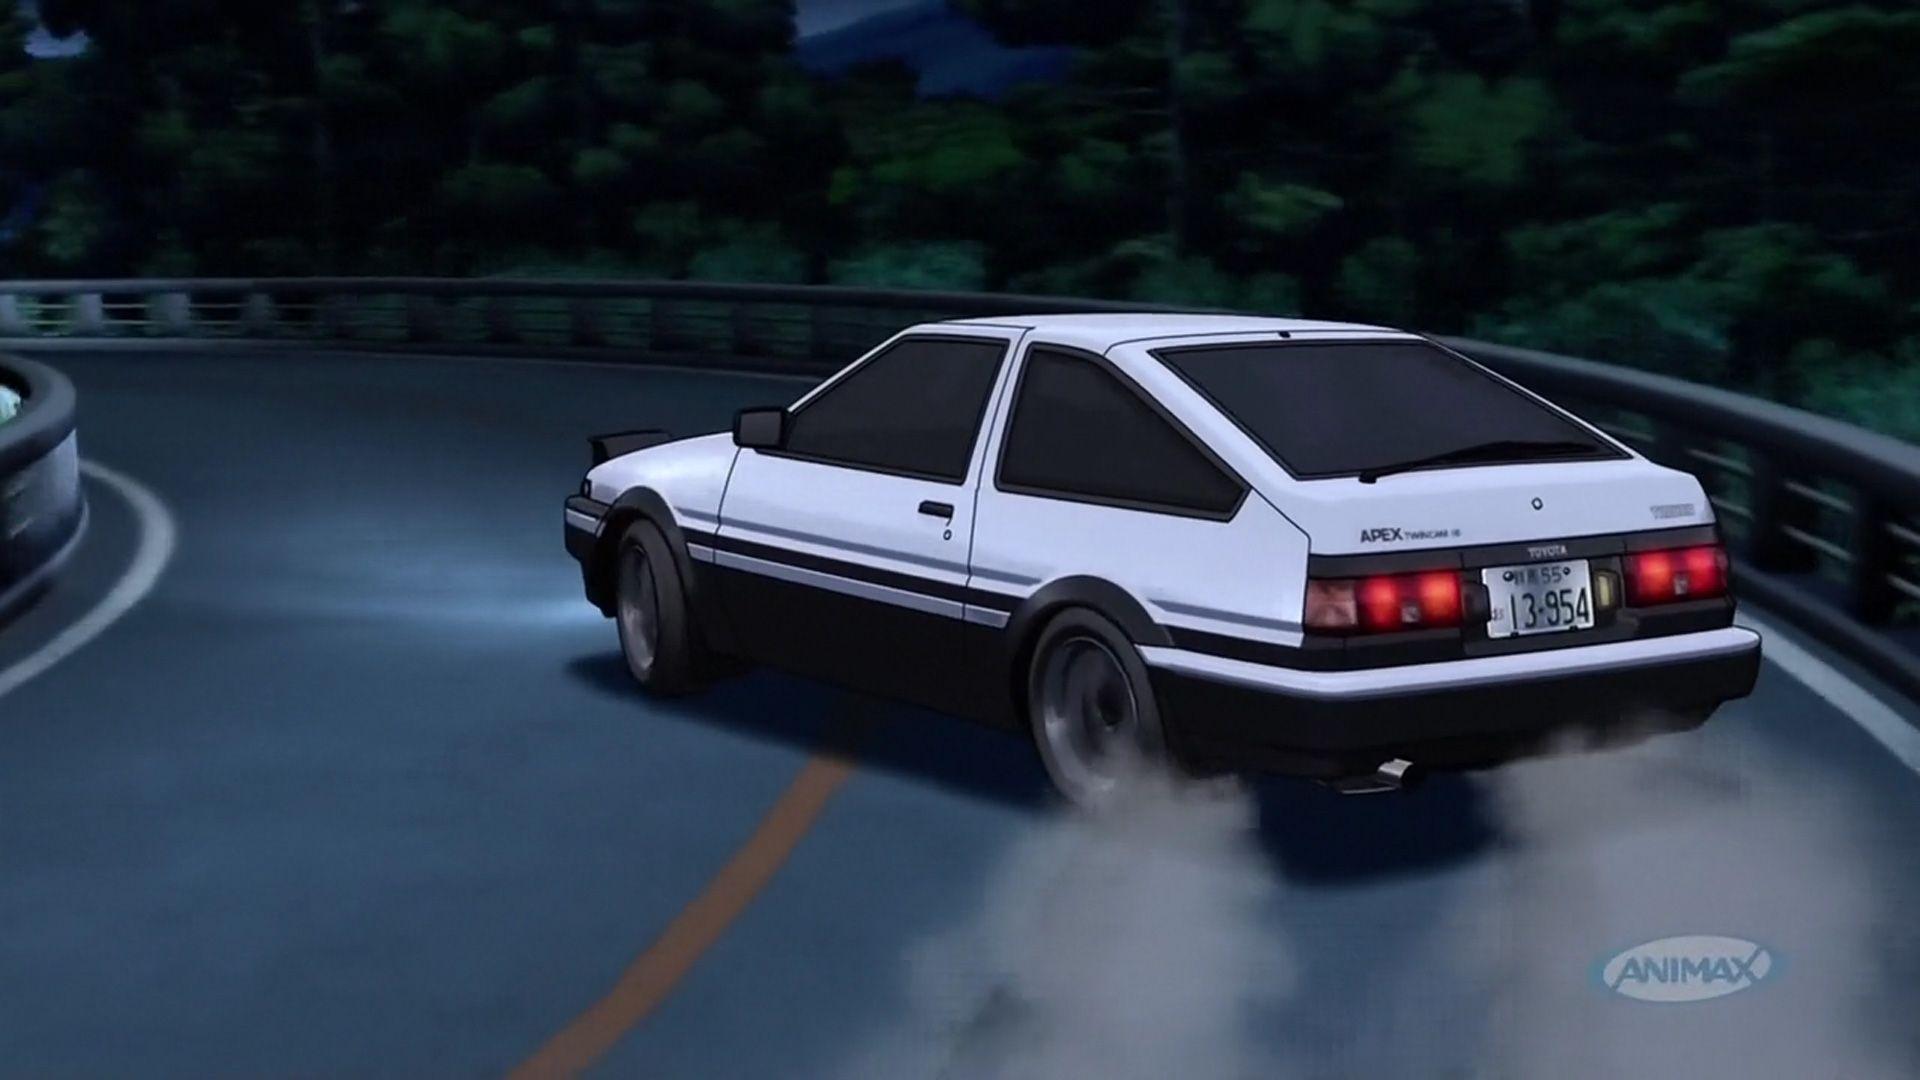 Initial D: Toyota AE86 or “Eight